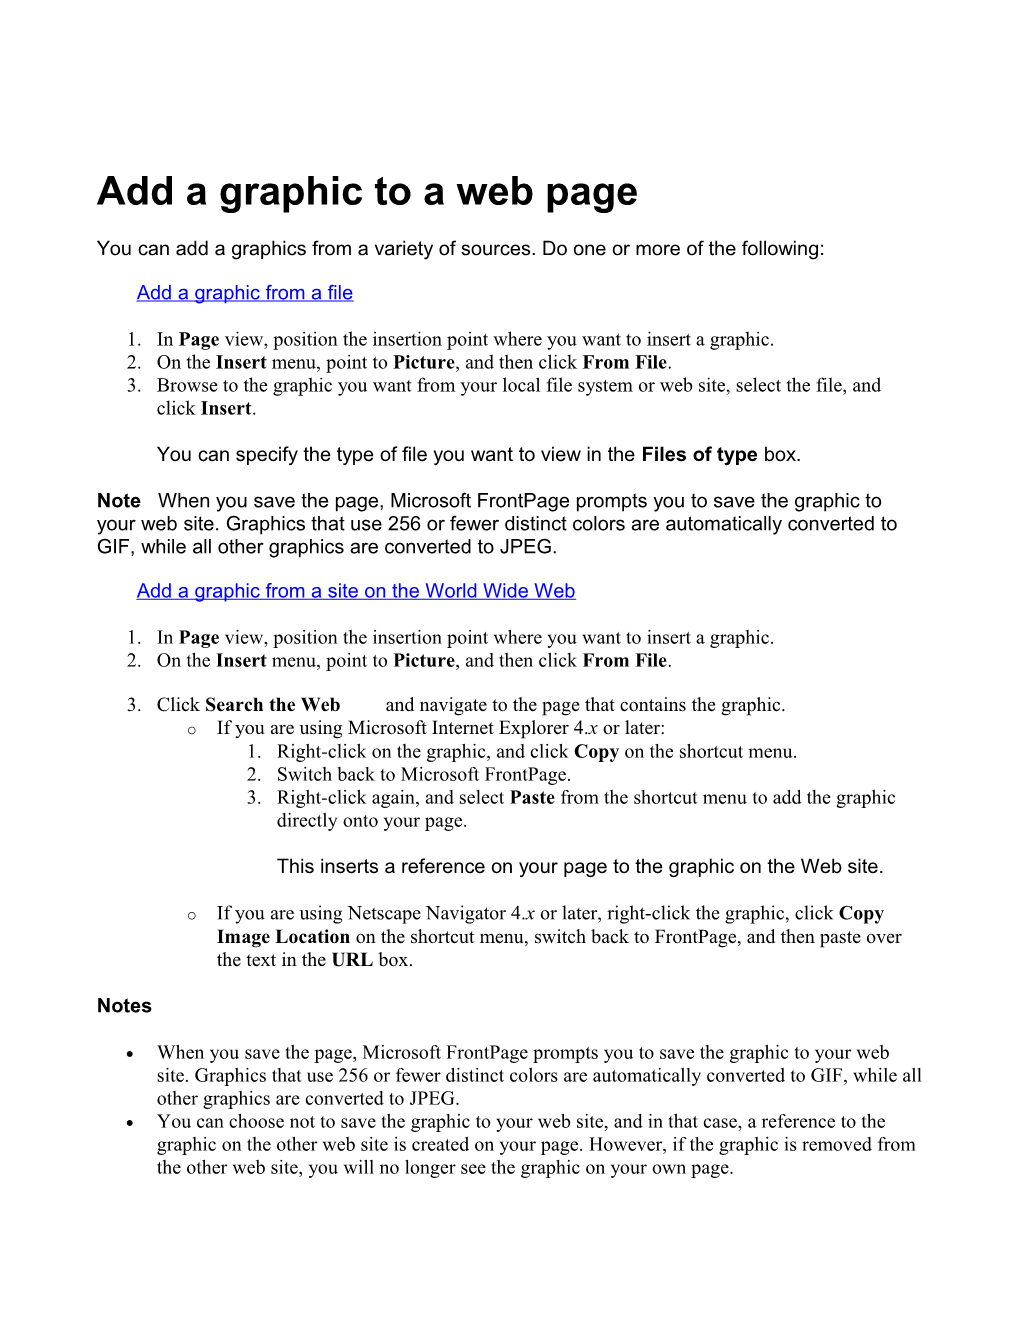 Add a Graphic to a Web Page